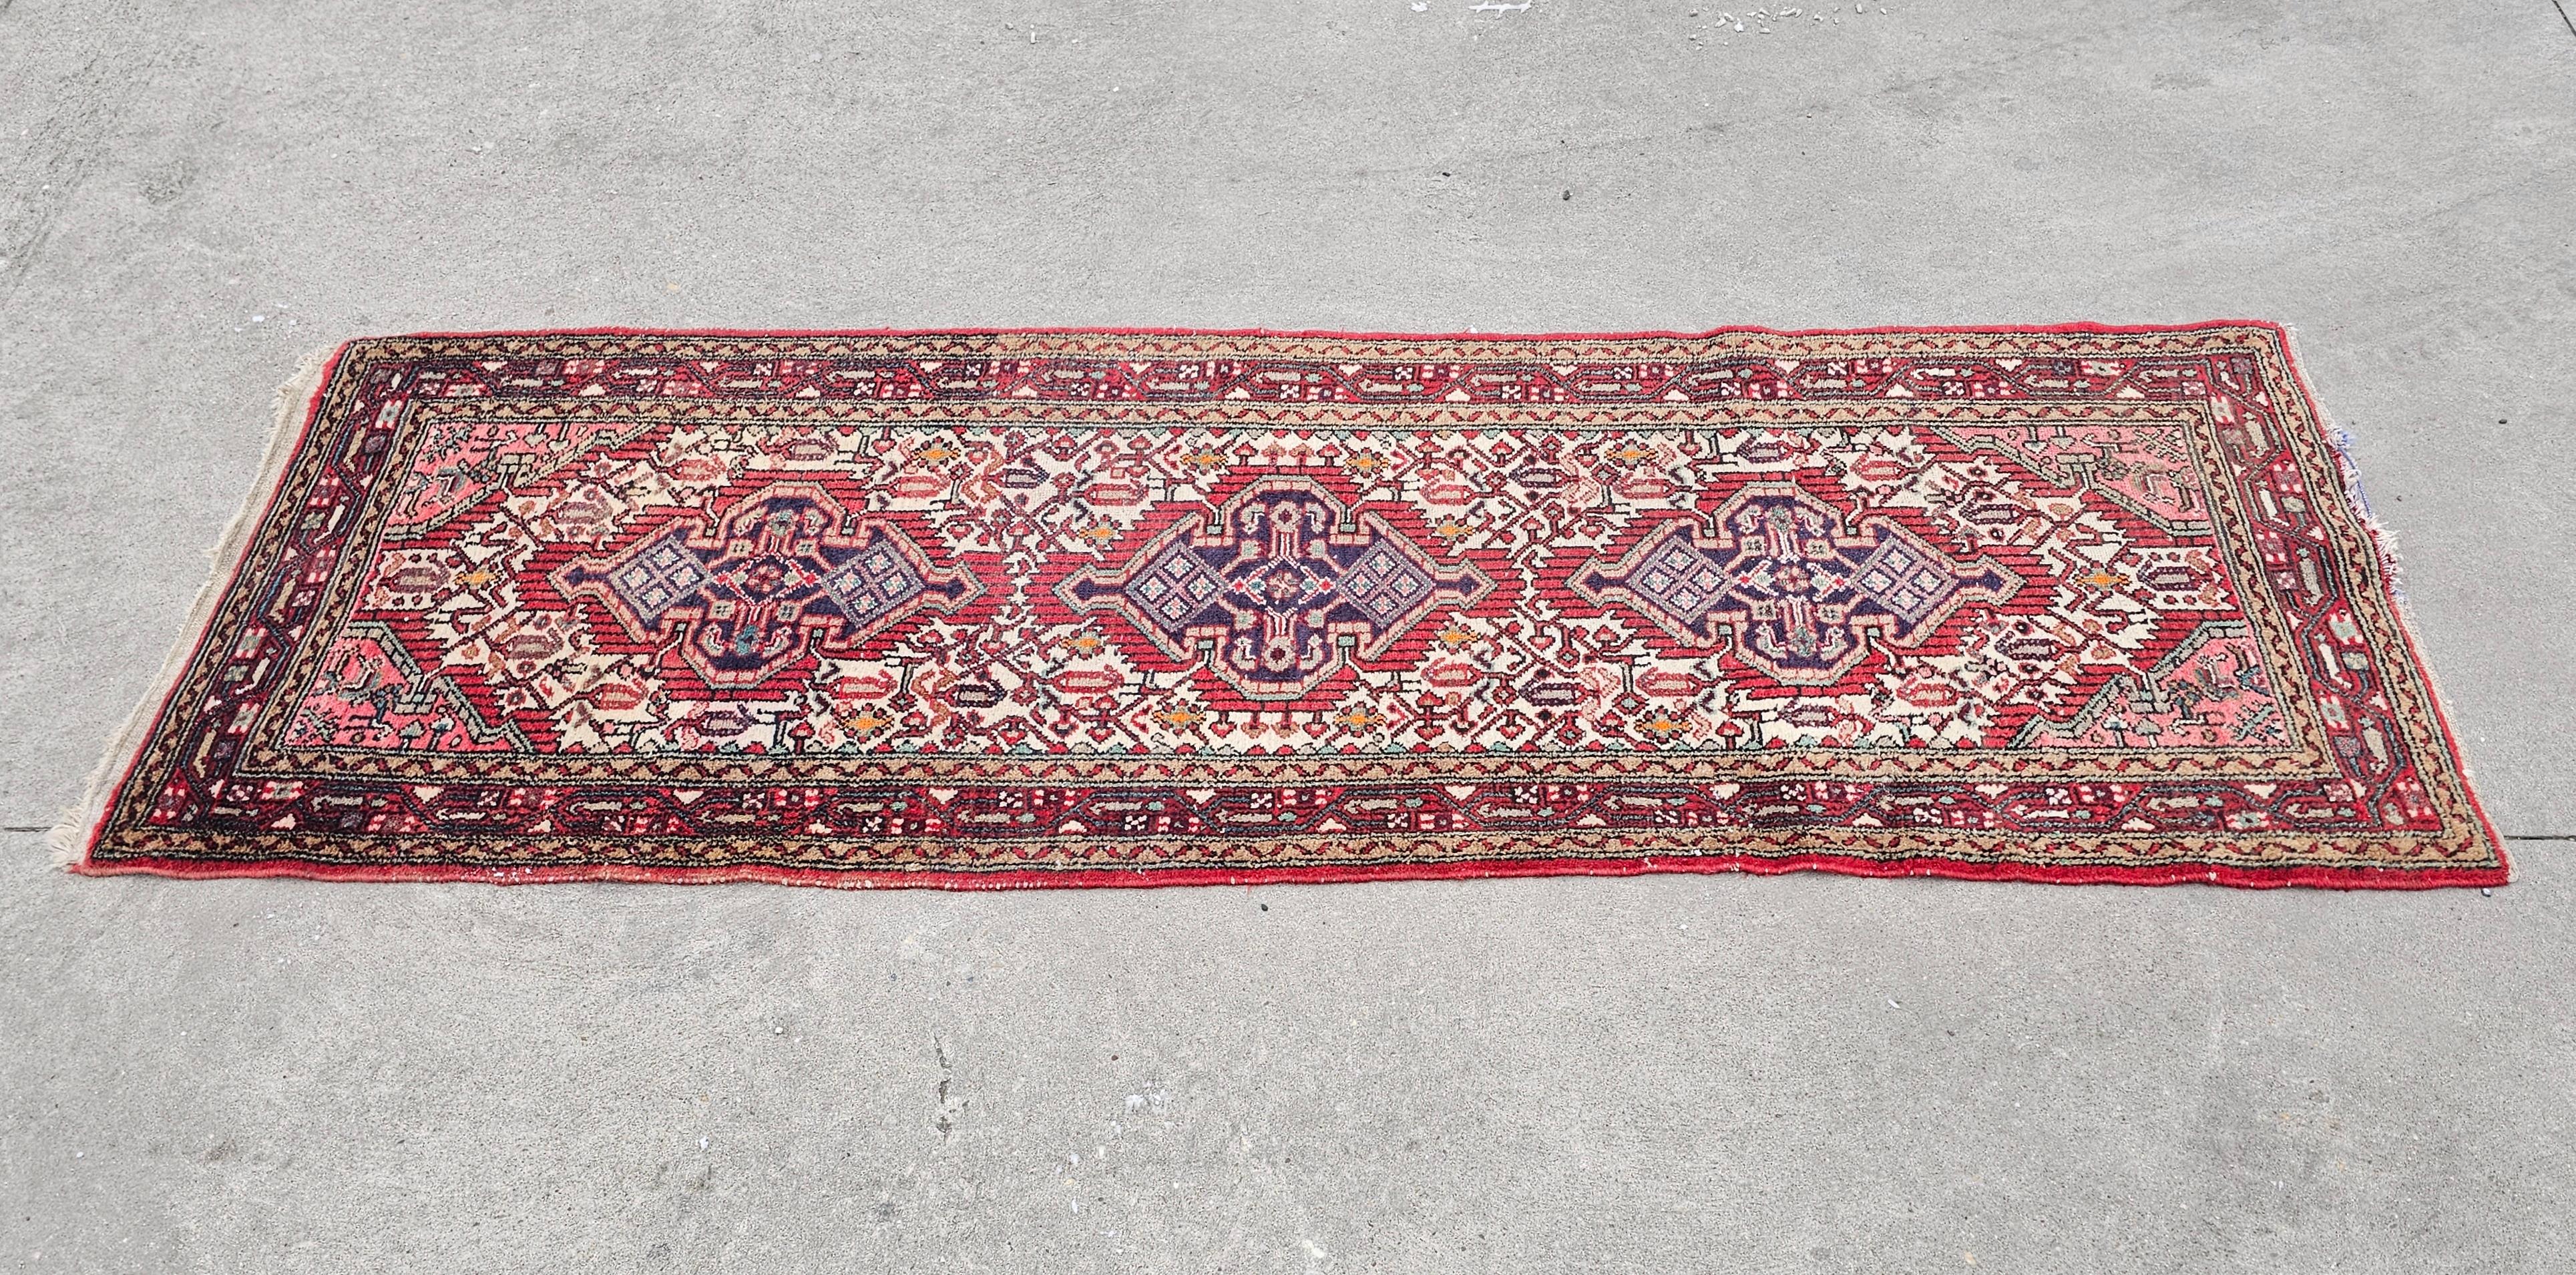 Vintage Persian Hamadan Hand-Knotted Runner, Iran 1950s For Sale 3